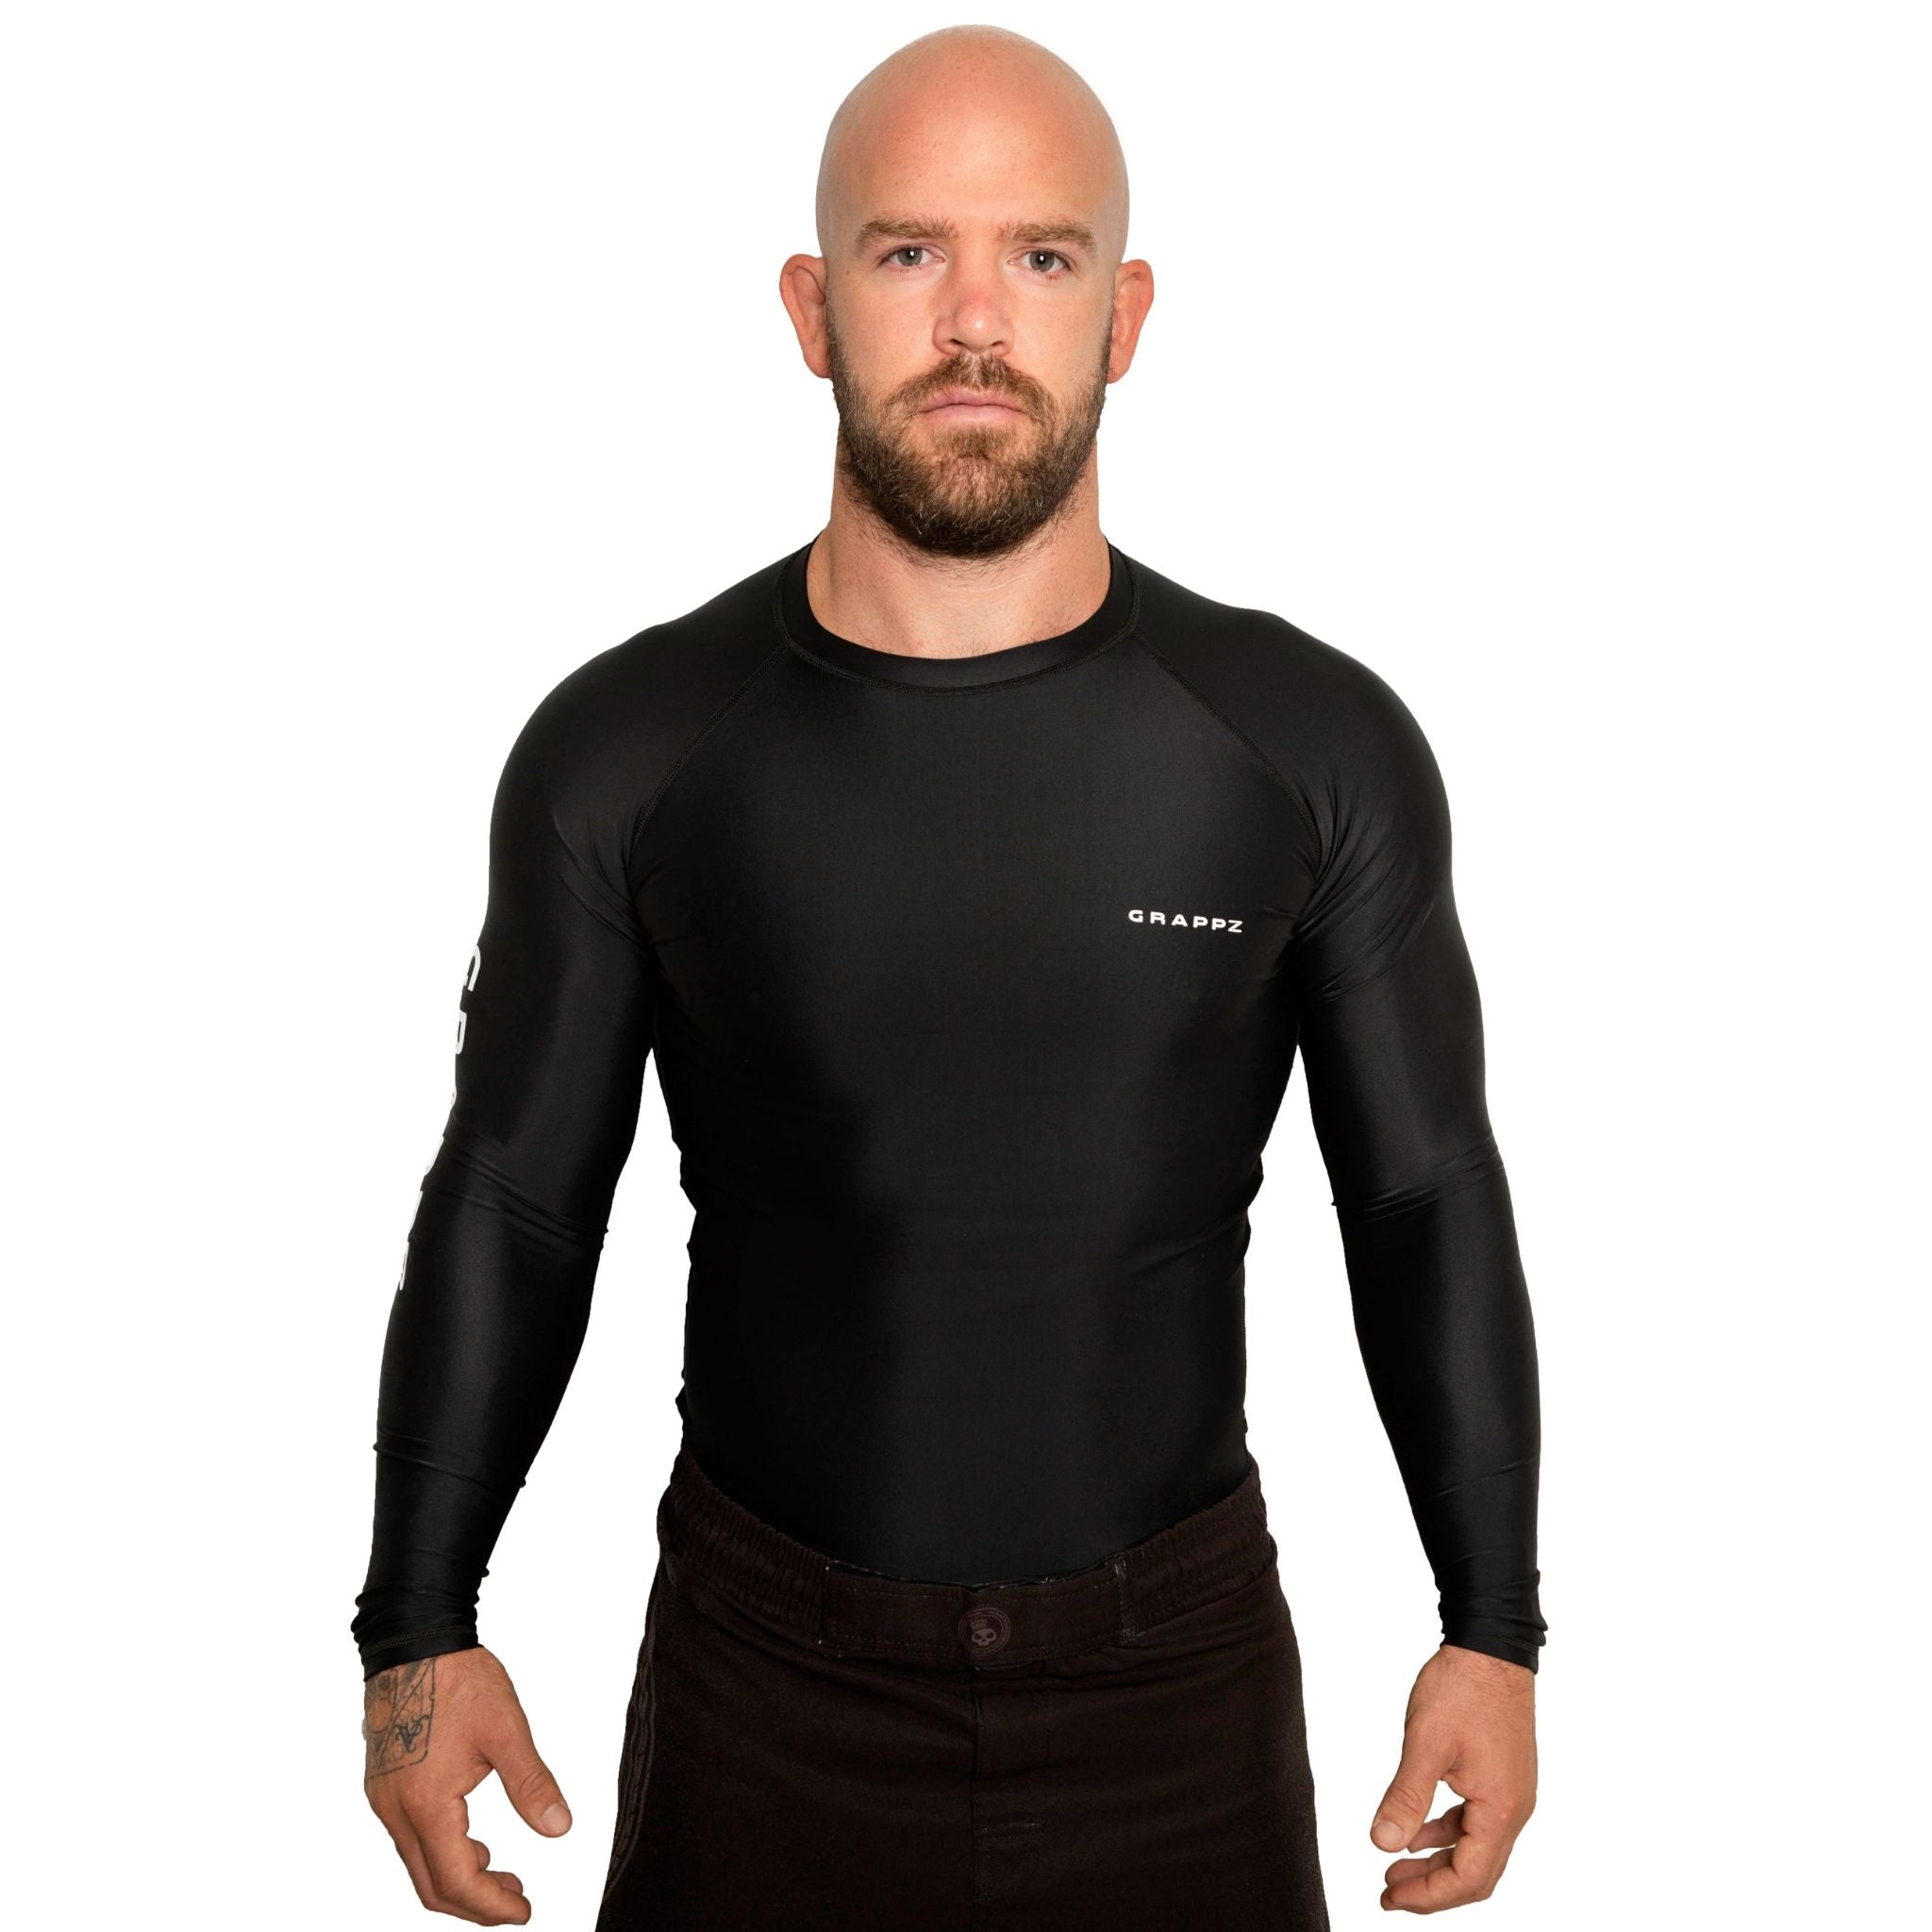 Rashguard - Long Sleeve Athletic Compression Shirt - Base layer - By Grappz  - X-Small